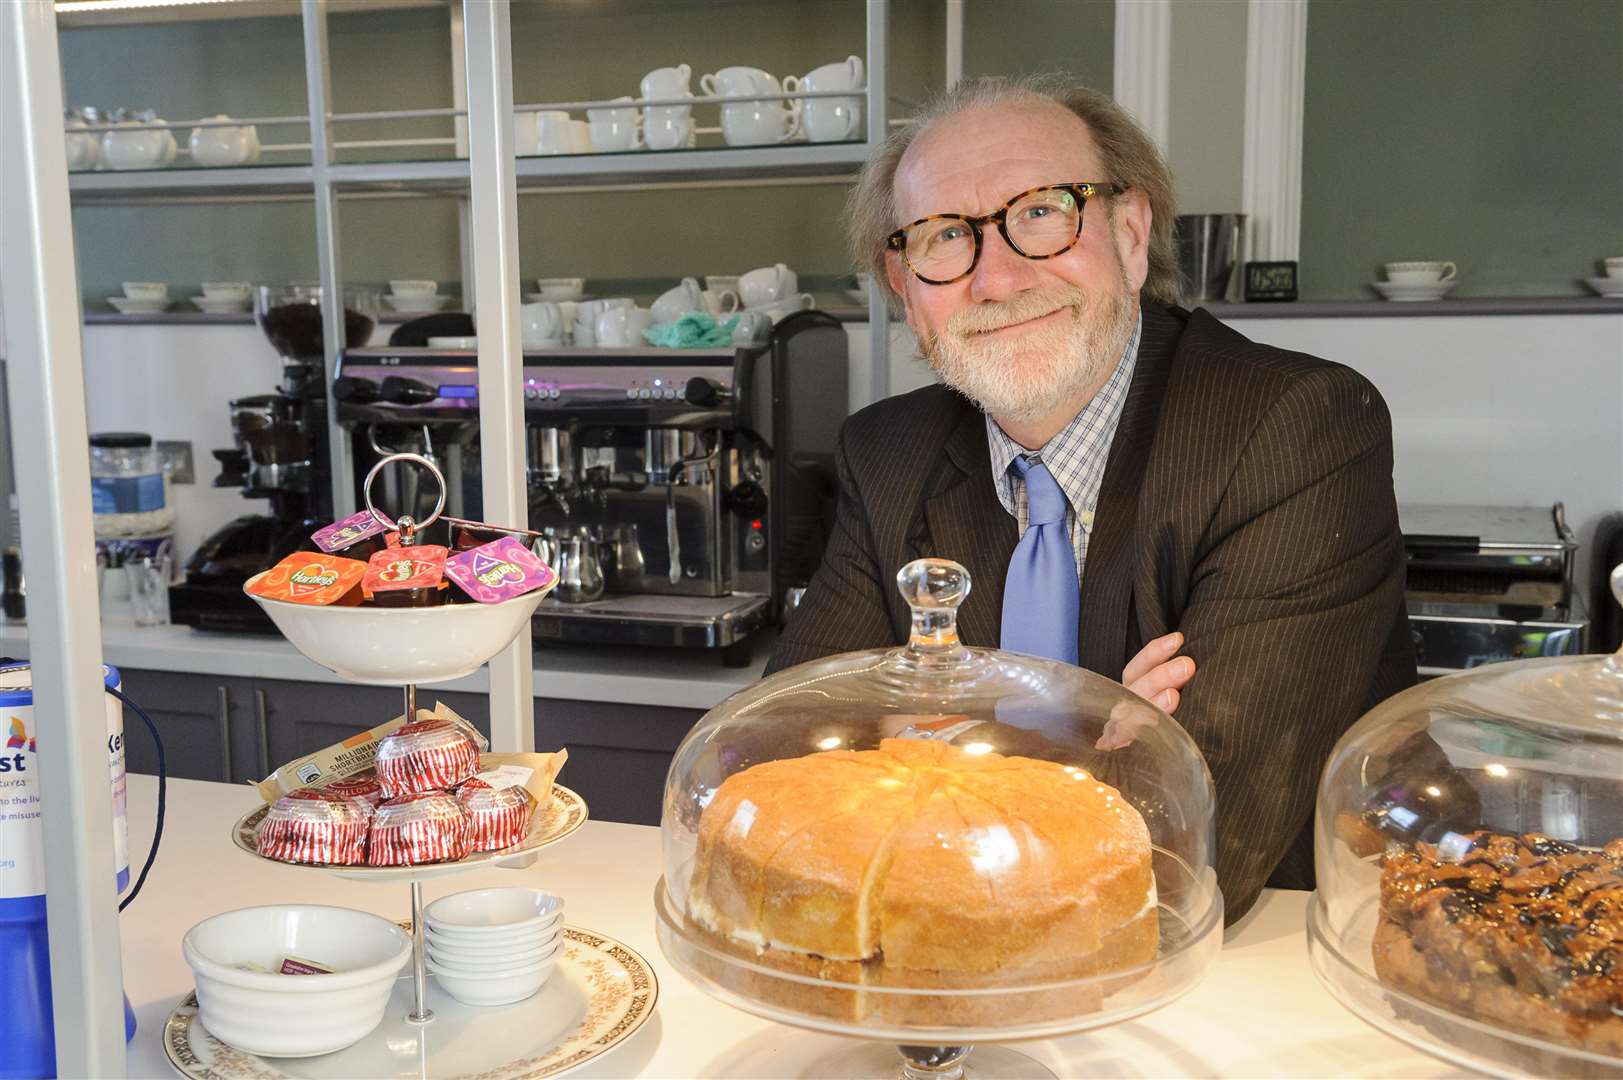 Former chief executive David Philpott, pictured at the opening of a cafe at the Kenward Trust, has become the charity's chairman